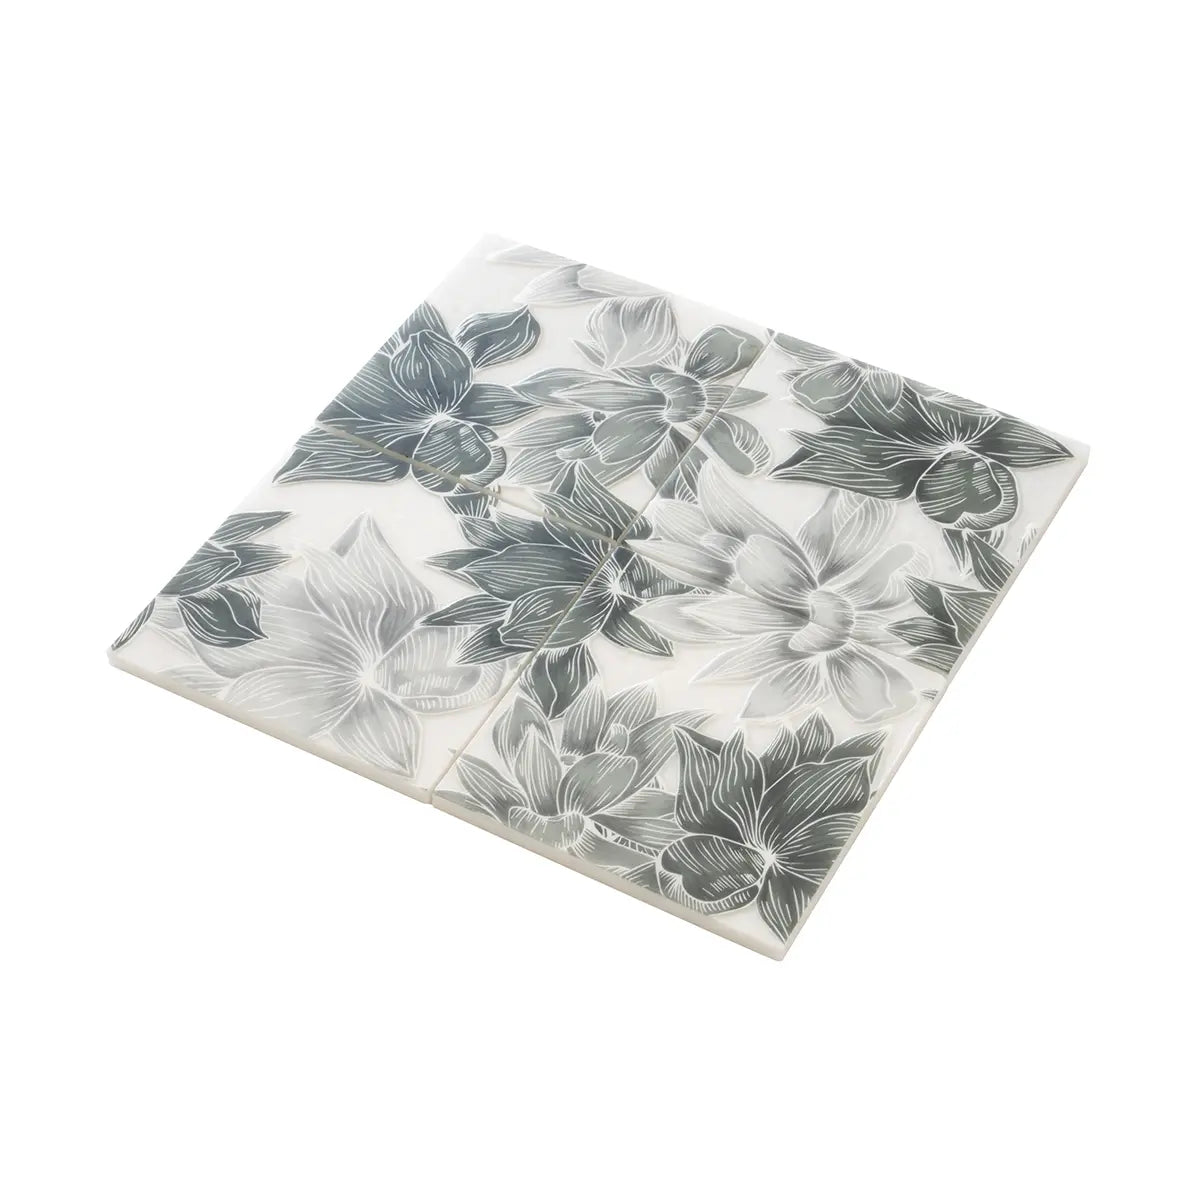 Bluma Floral Green Etched Marble Mosaic